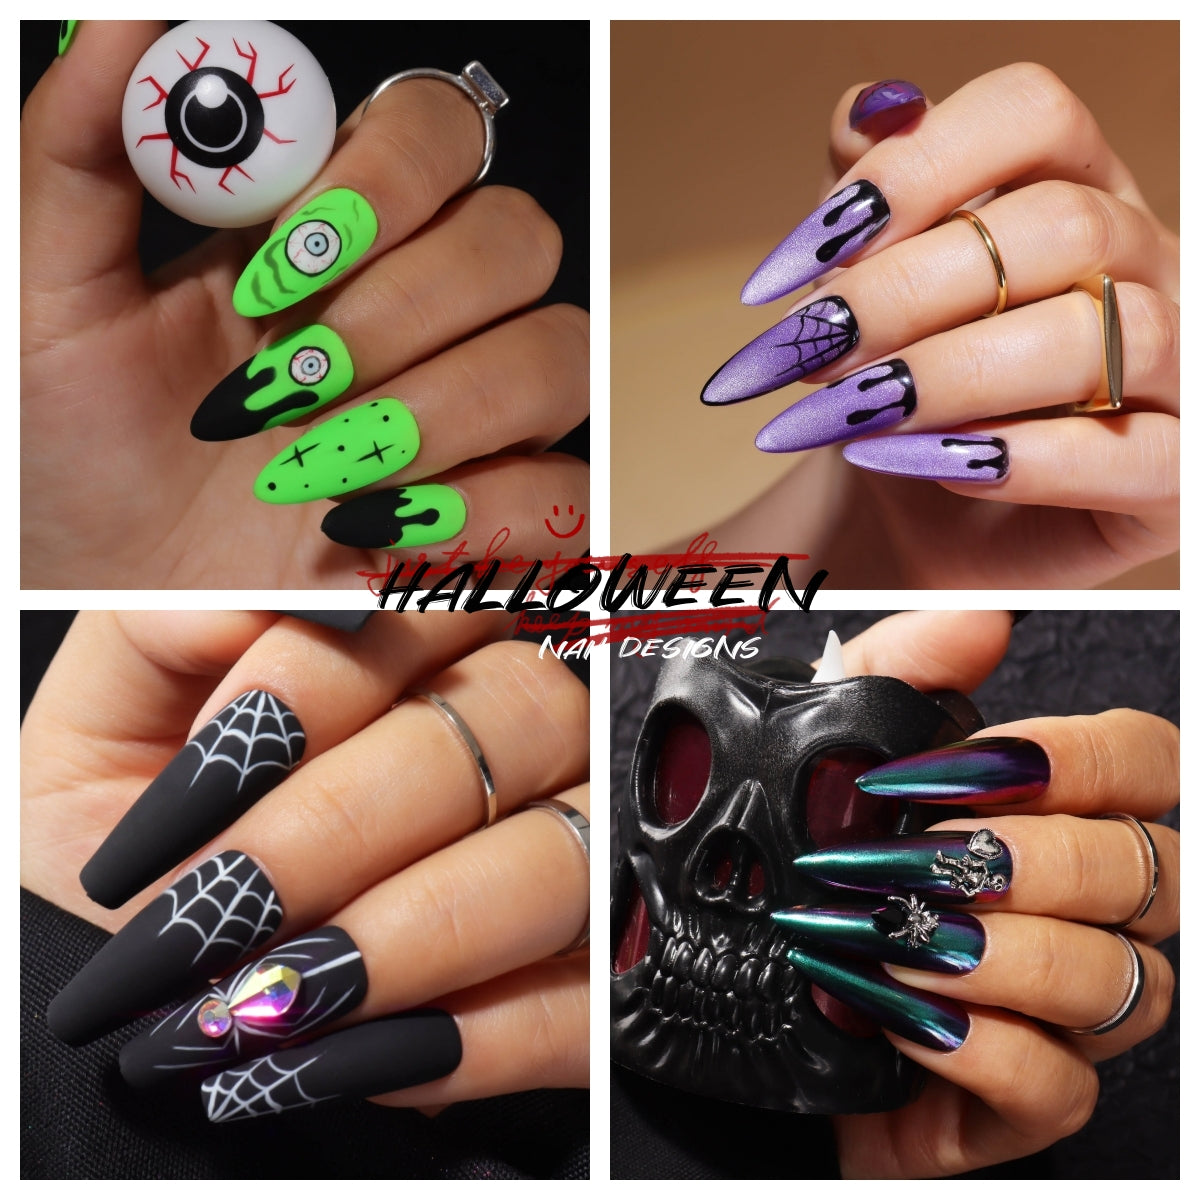 12 Halloween Nail Designs To Recreate At Home–Easy & Stylish Inspiration